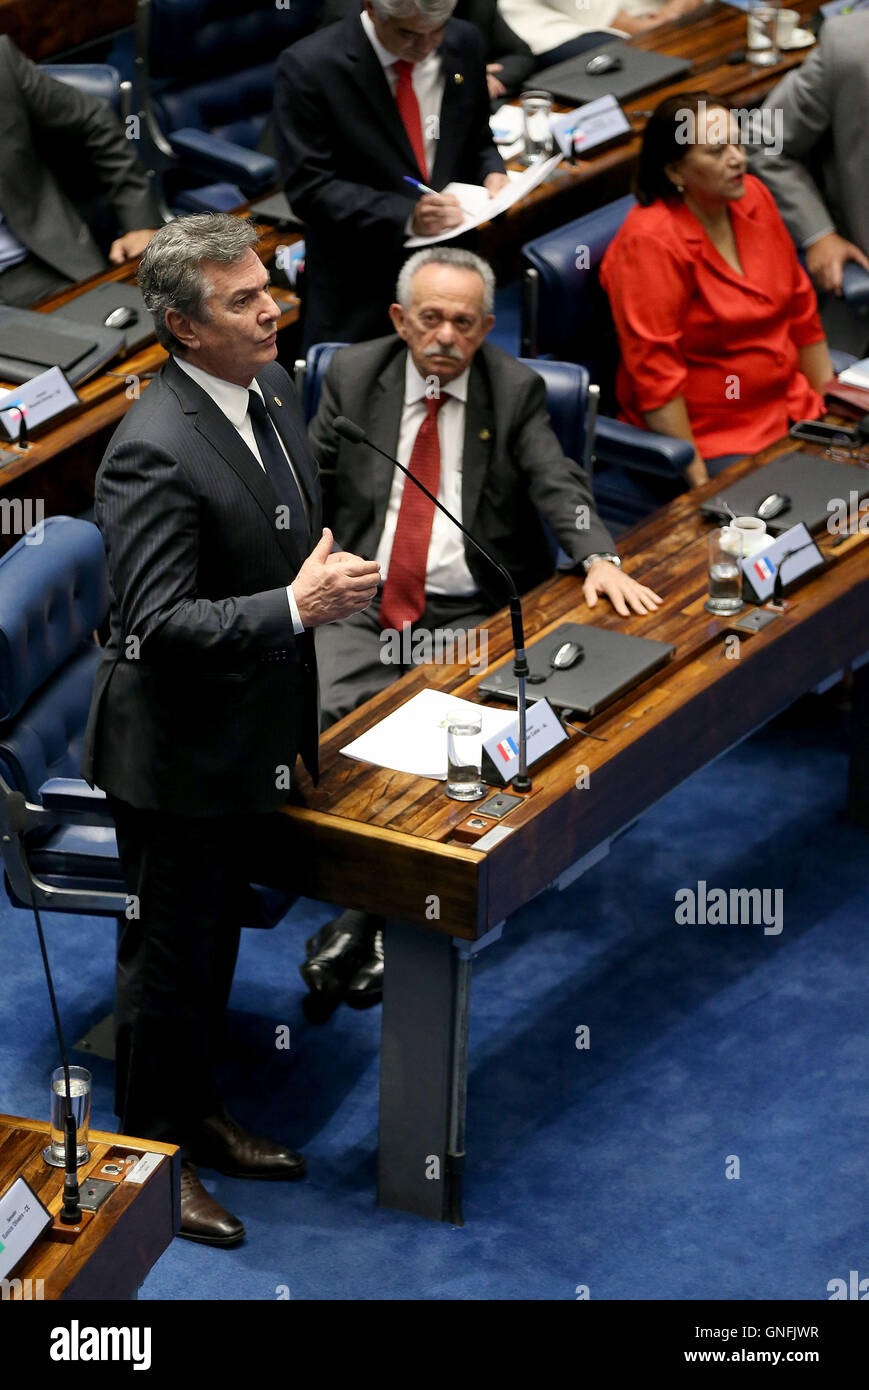 Brasilia, Brazil. 31st Aug, 2016. Brazil's senator and former president Fernando Collor de Mello (L) speaks during Senate's final impeachment session of Brazil's suspended President Dilma Rousseff in Brasilia, capital of Brazil, on Aug. 31, 2016. Brazilian senators will vote on Wednesday to decide whether Brazil's suspended President Dilma Rousseff will be impeached or not. The impeachment requires a two-thirds vote, or 54 of the 81 senators. Credit:  Li Ming/Xinhua/Alamy Live News Stock Photo